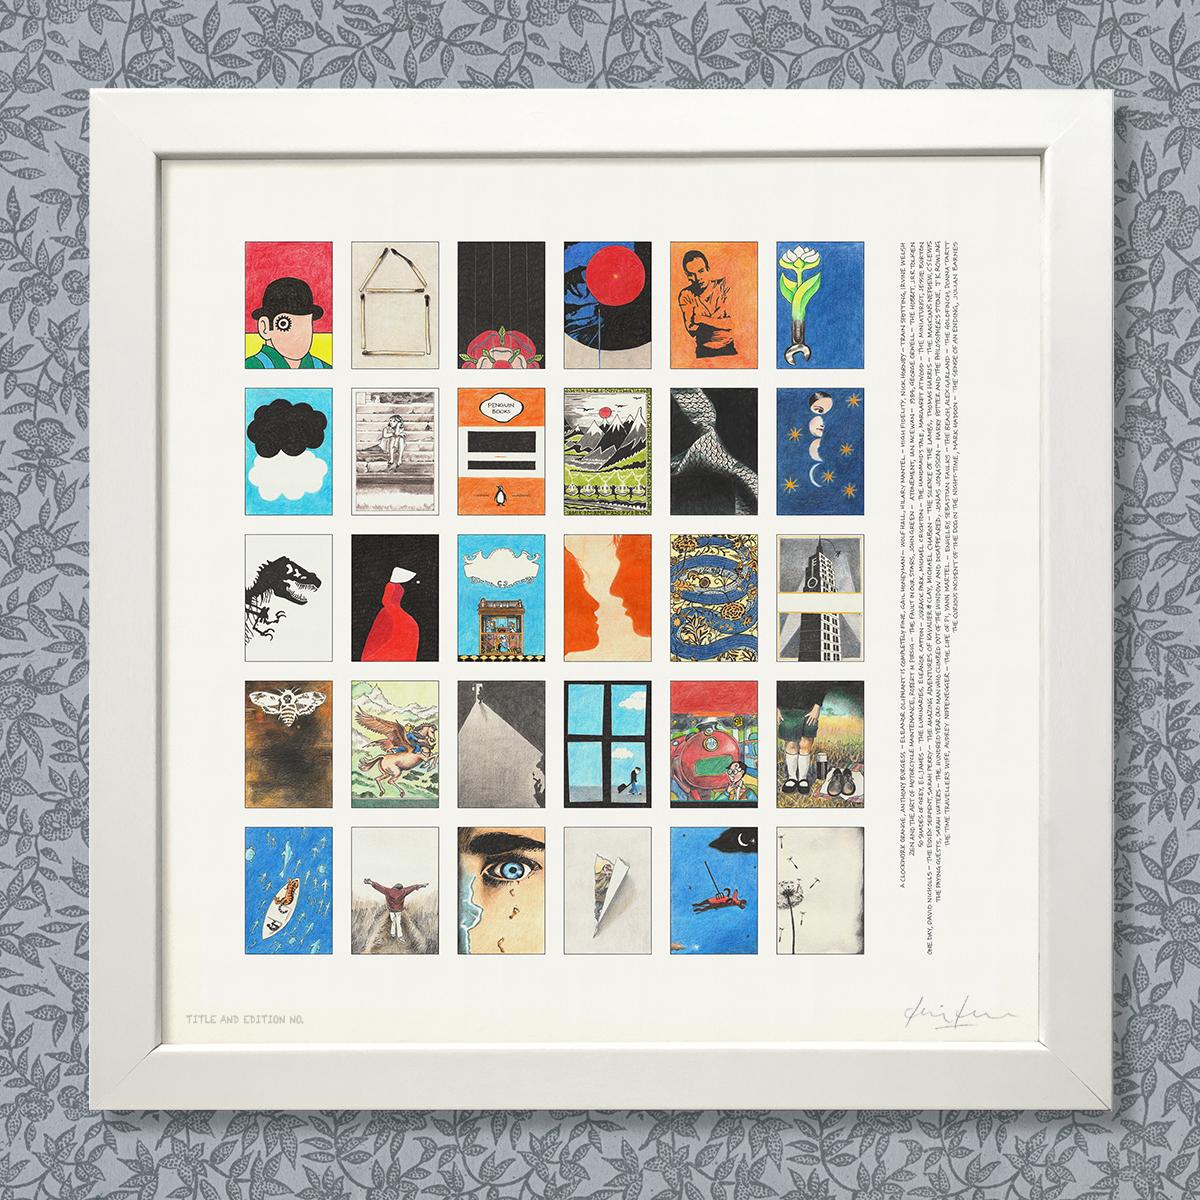 Limited edition montage print of book covers in a white frame.